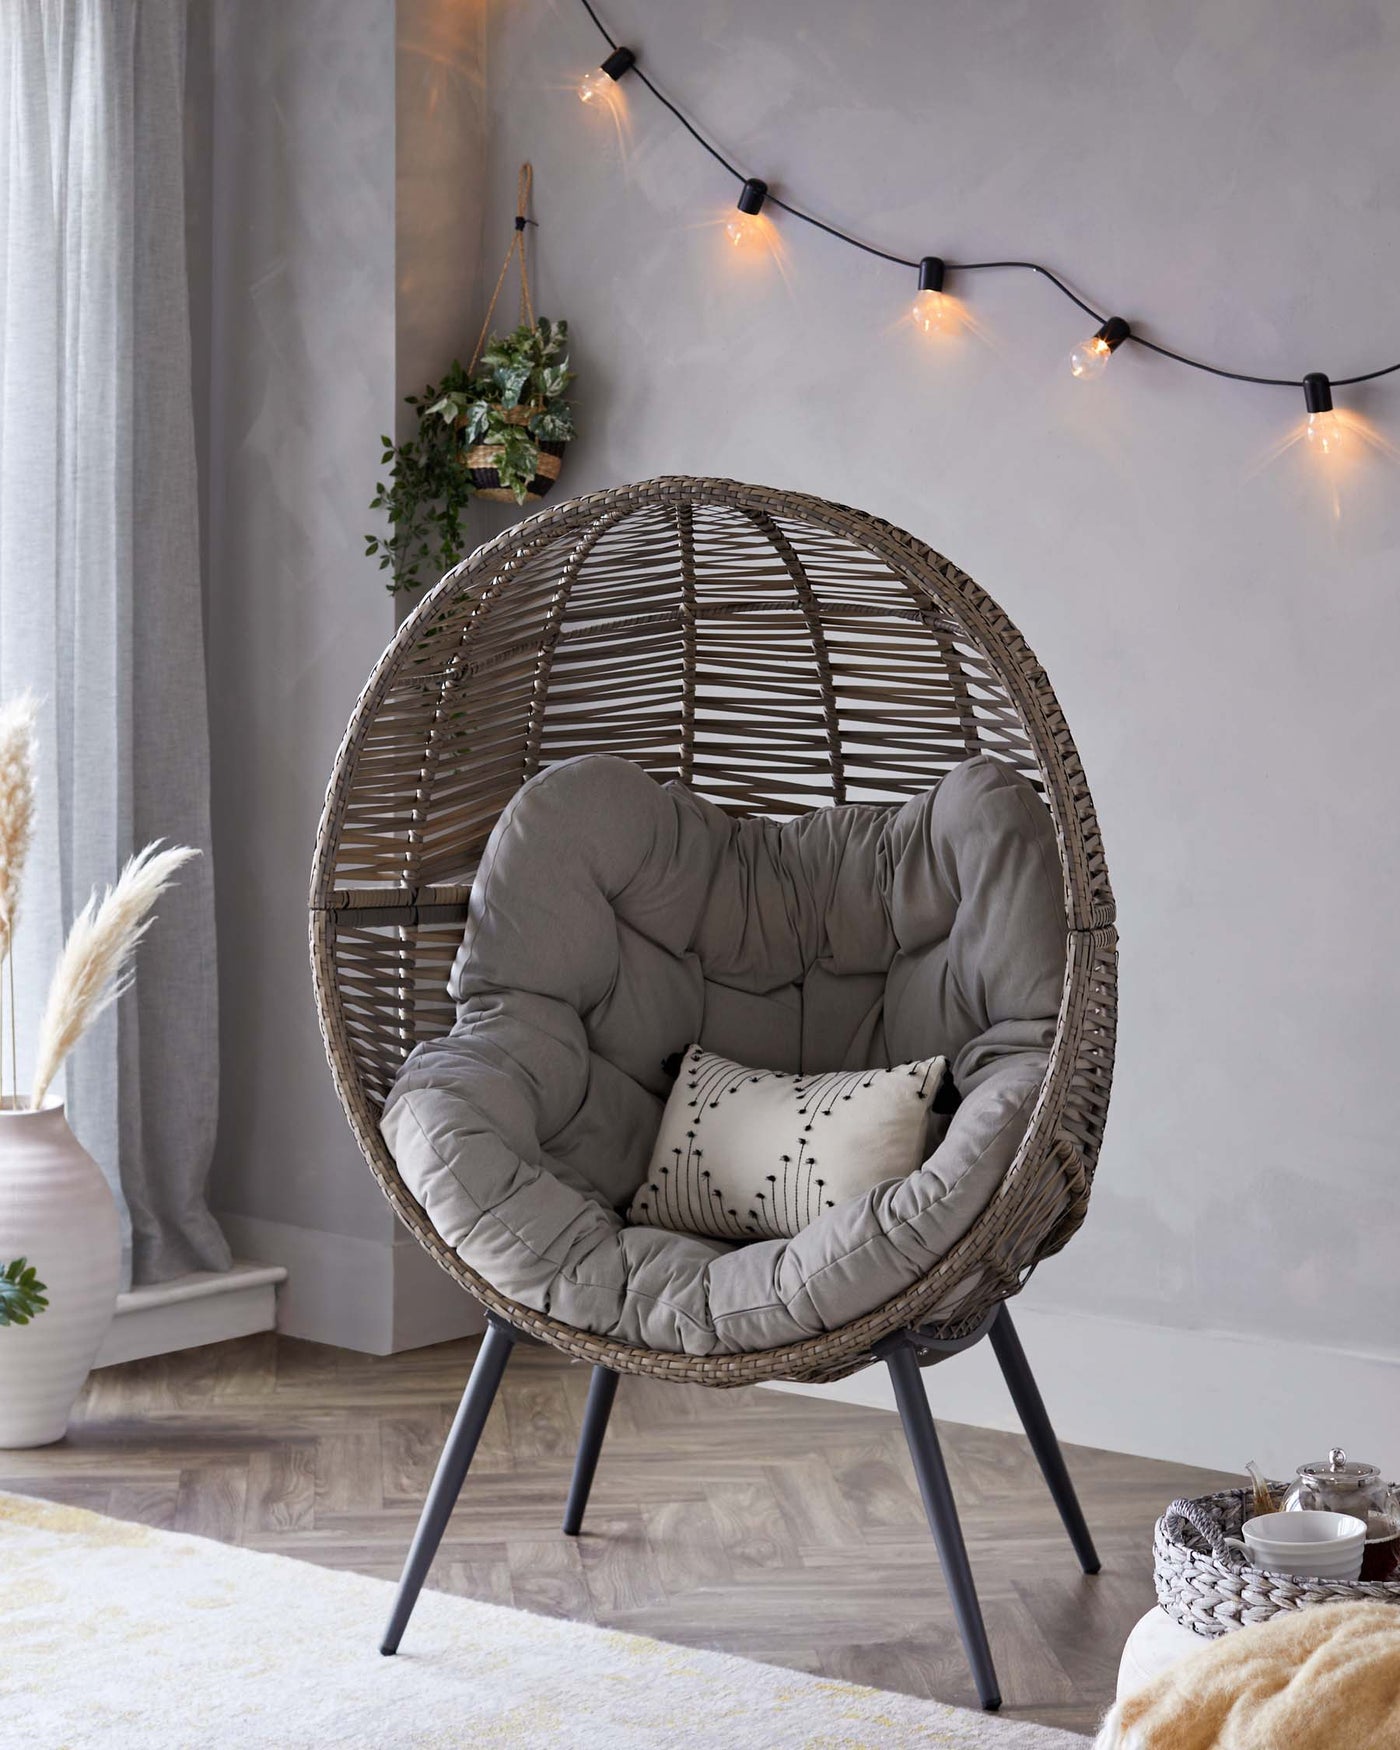 A contemporary egg-shaped wicker chair with a plush grey cushion, standing on four sleek black metal legs. A small rectangular patterned pillow adds an accent to the cosy nest-like seat, which offers a stylish and inviting place to relax.